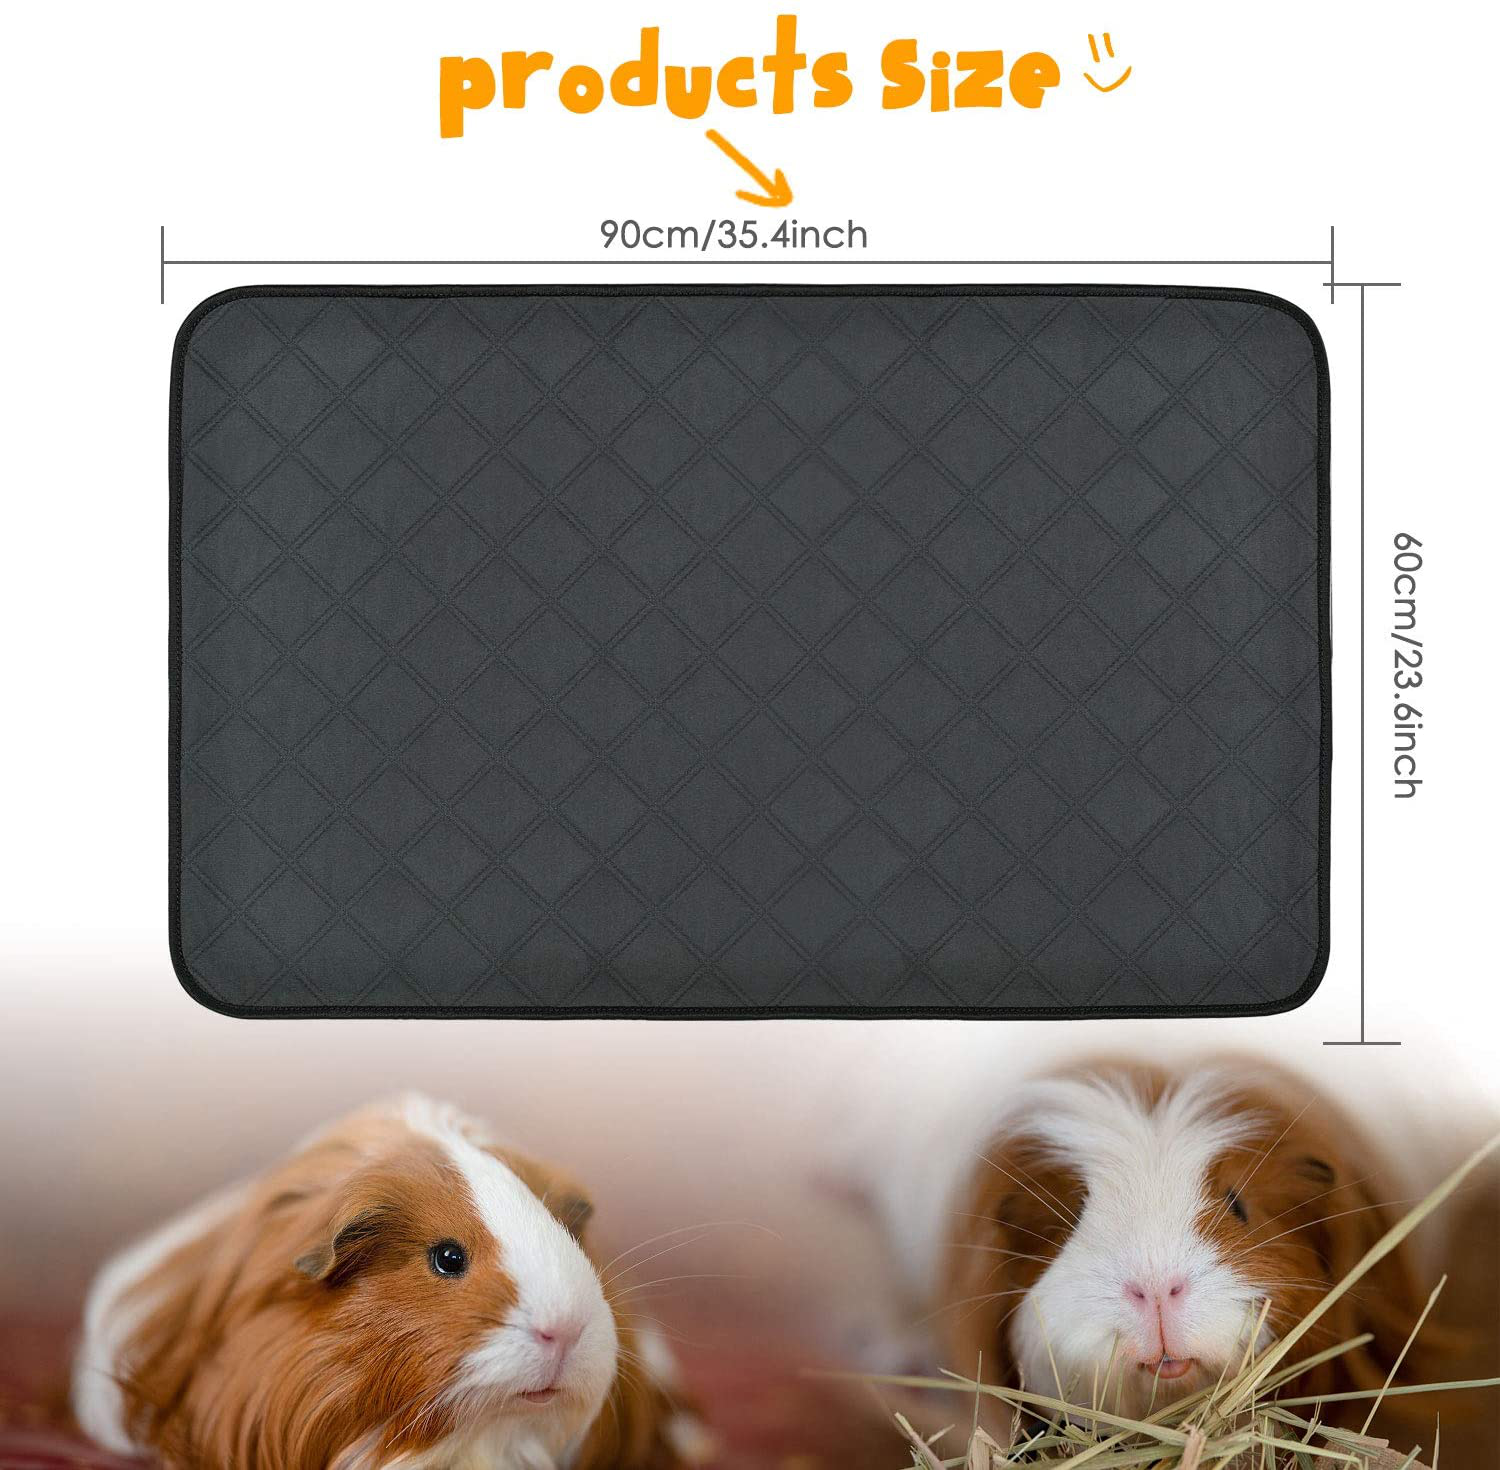 BWOGUE Guinea Pig Fleece Cage Liners, 2 Pack Washable Guinea Pig Pee Pads, Waterproof Reusable& anti Slip Guinea Pig Bedding Super Absorbent Pee Pad for Small Animals